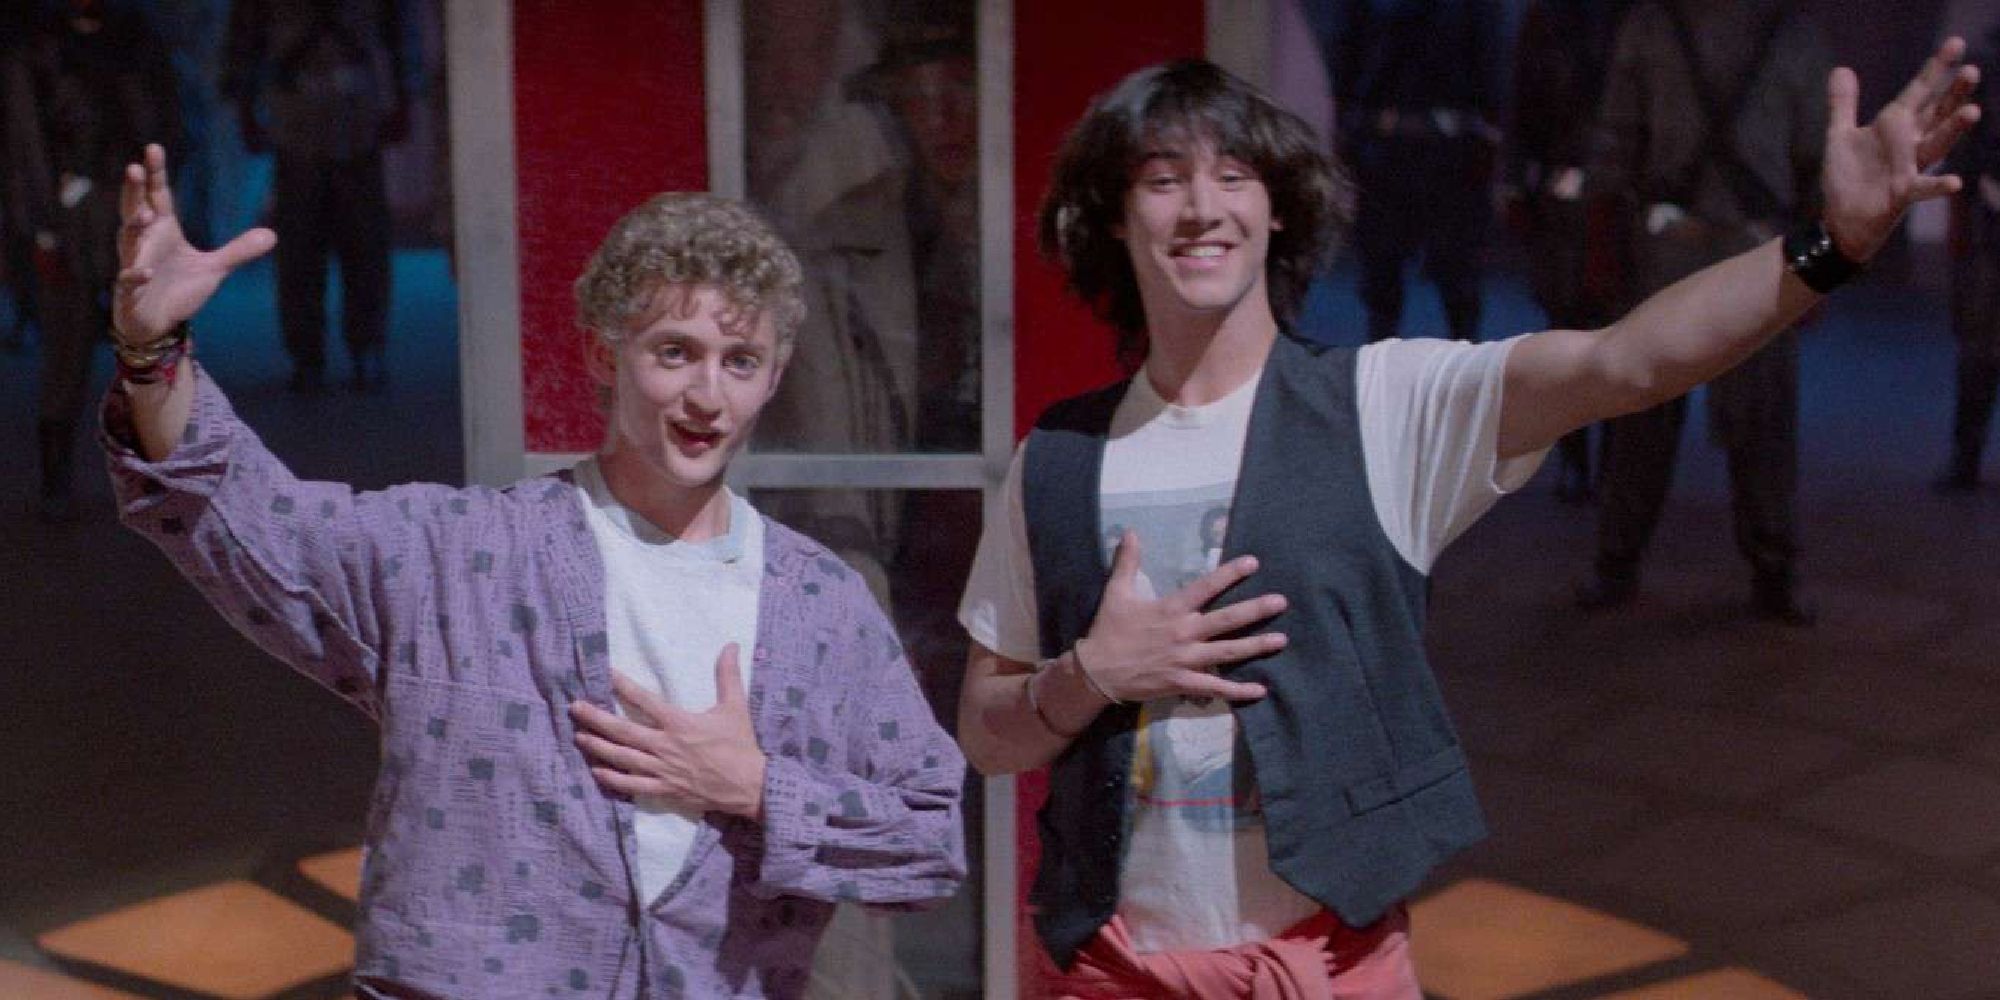 Bill and Ted presenting the phone booth to a future council in Excellent Adventure